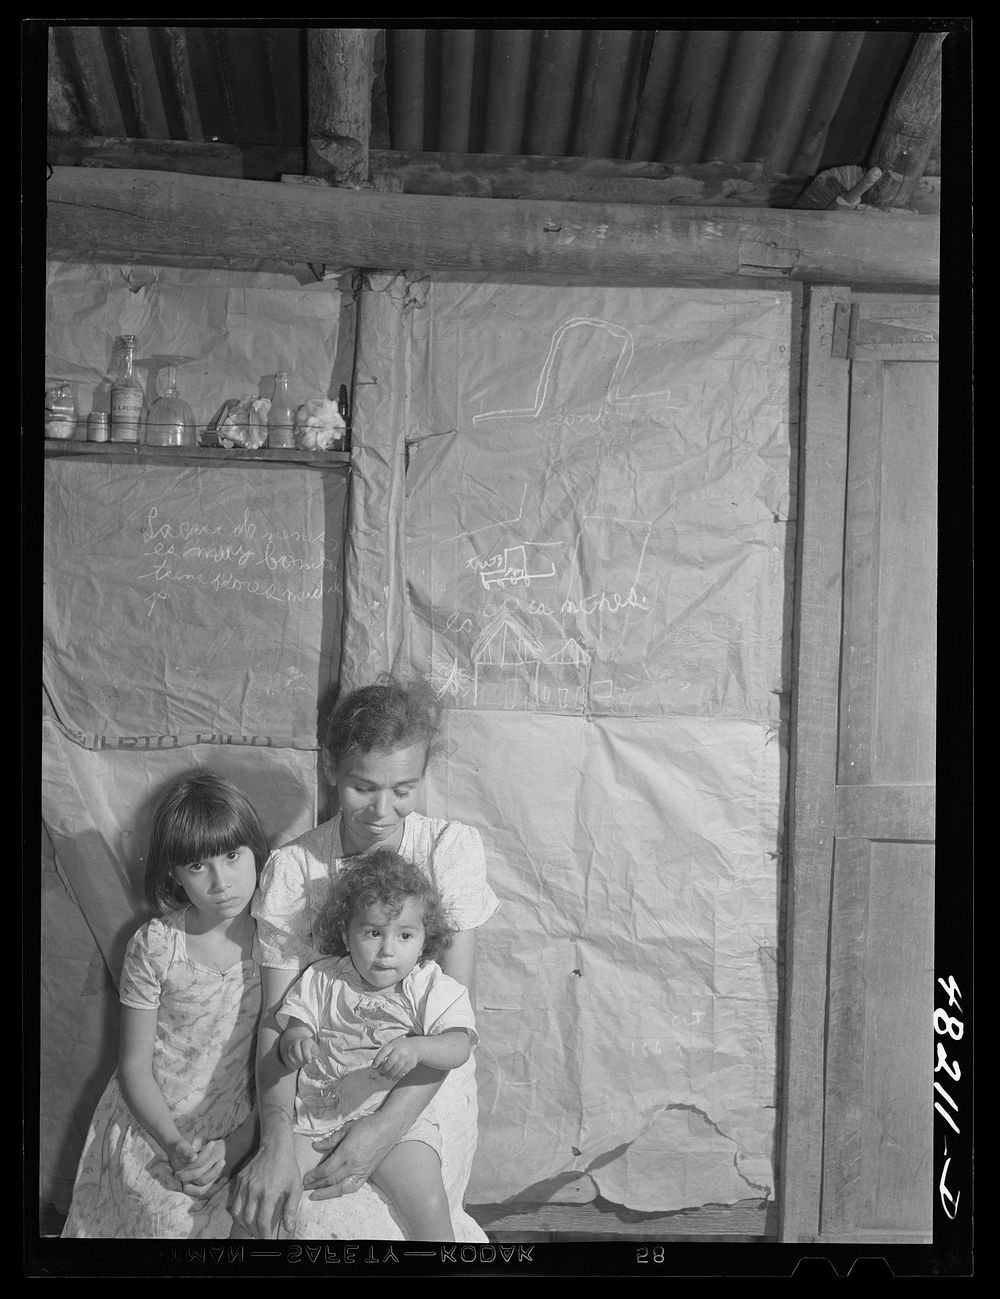 Utuado, Puerto Rico (vicinity). Farm laborer's family. Sourced from the Library of Congress.